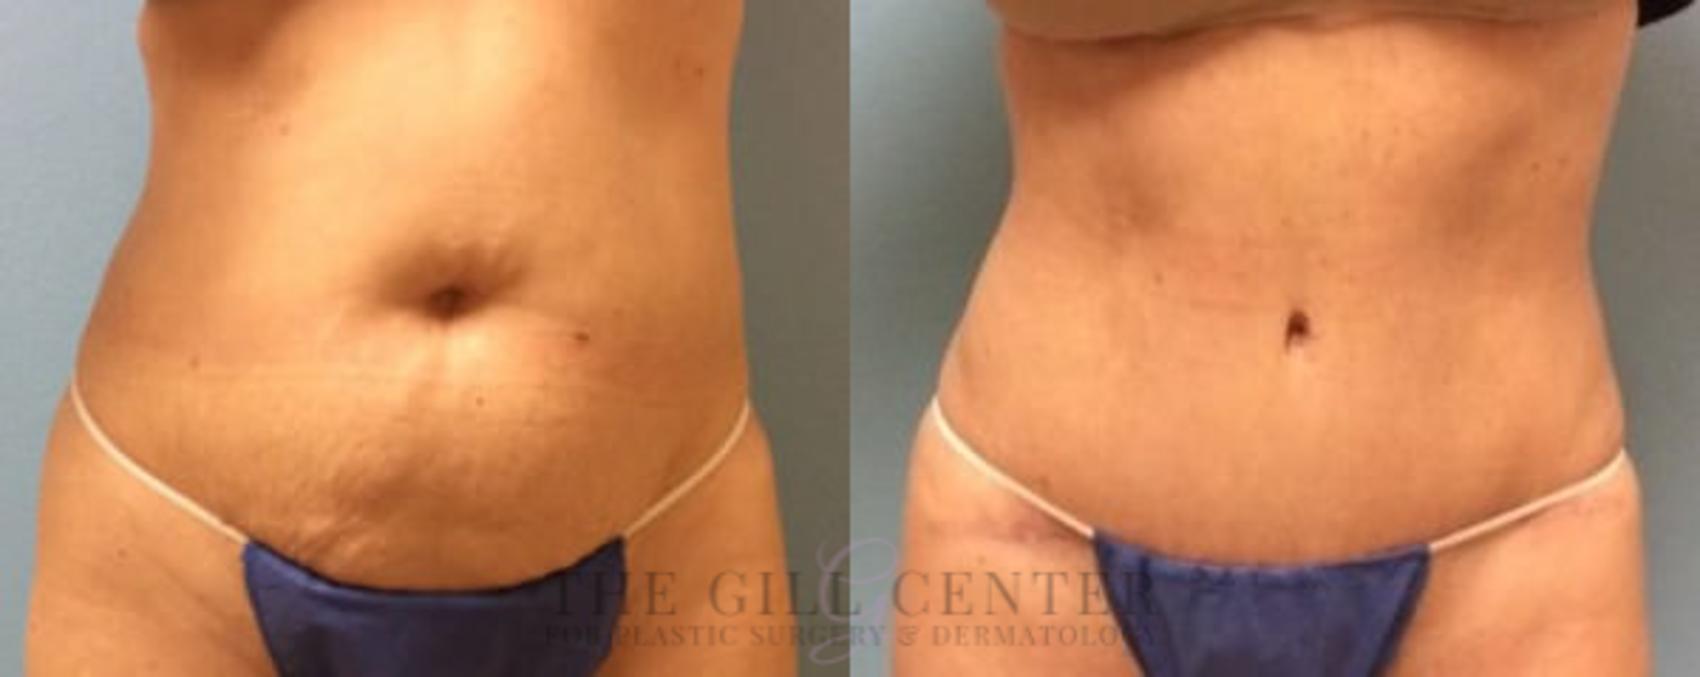 Tummy Tuck Case 188 Before & After Front | The Woodlands, TX | The Gill Center for Plastic Surgery and Dermatology